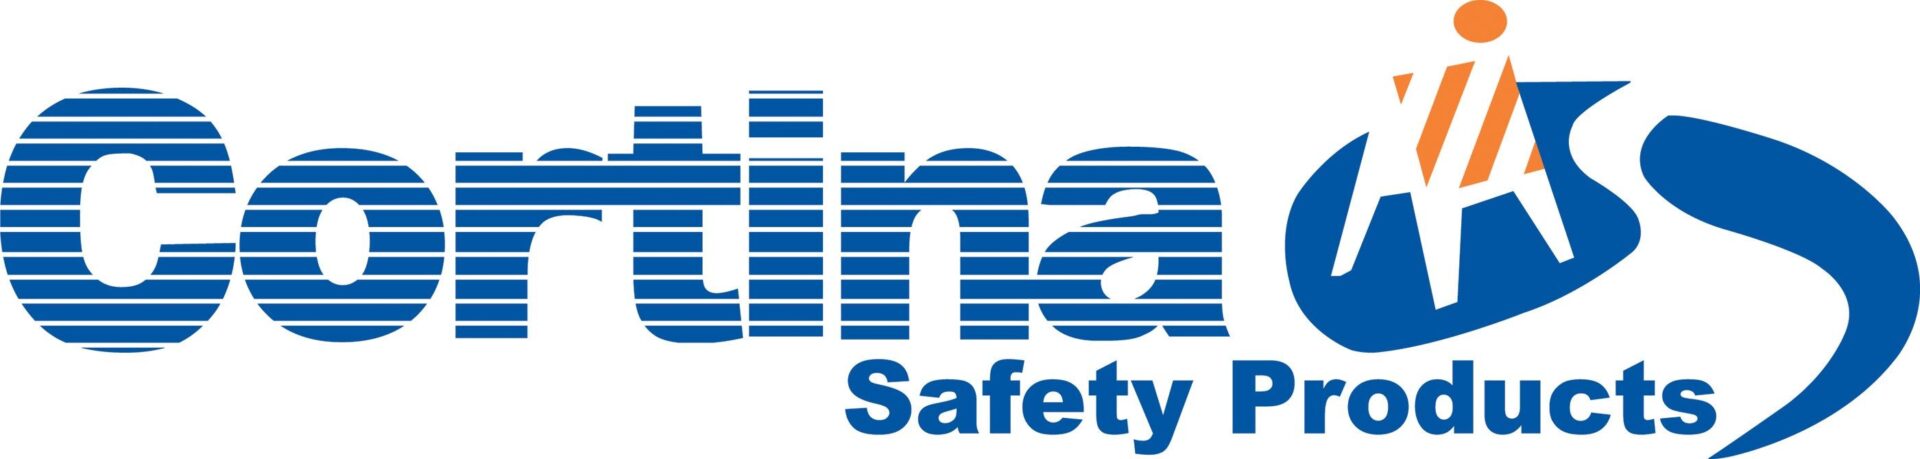 cortina-safety-products-logo